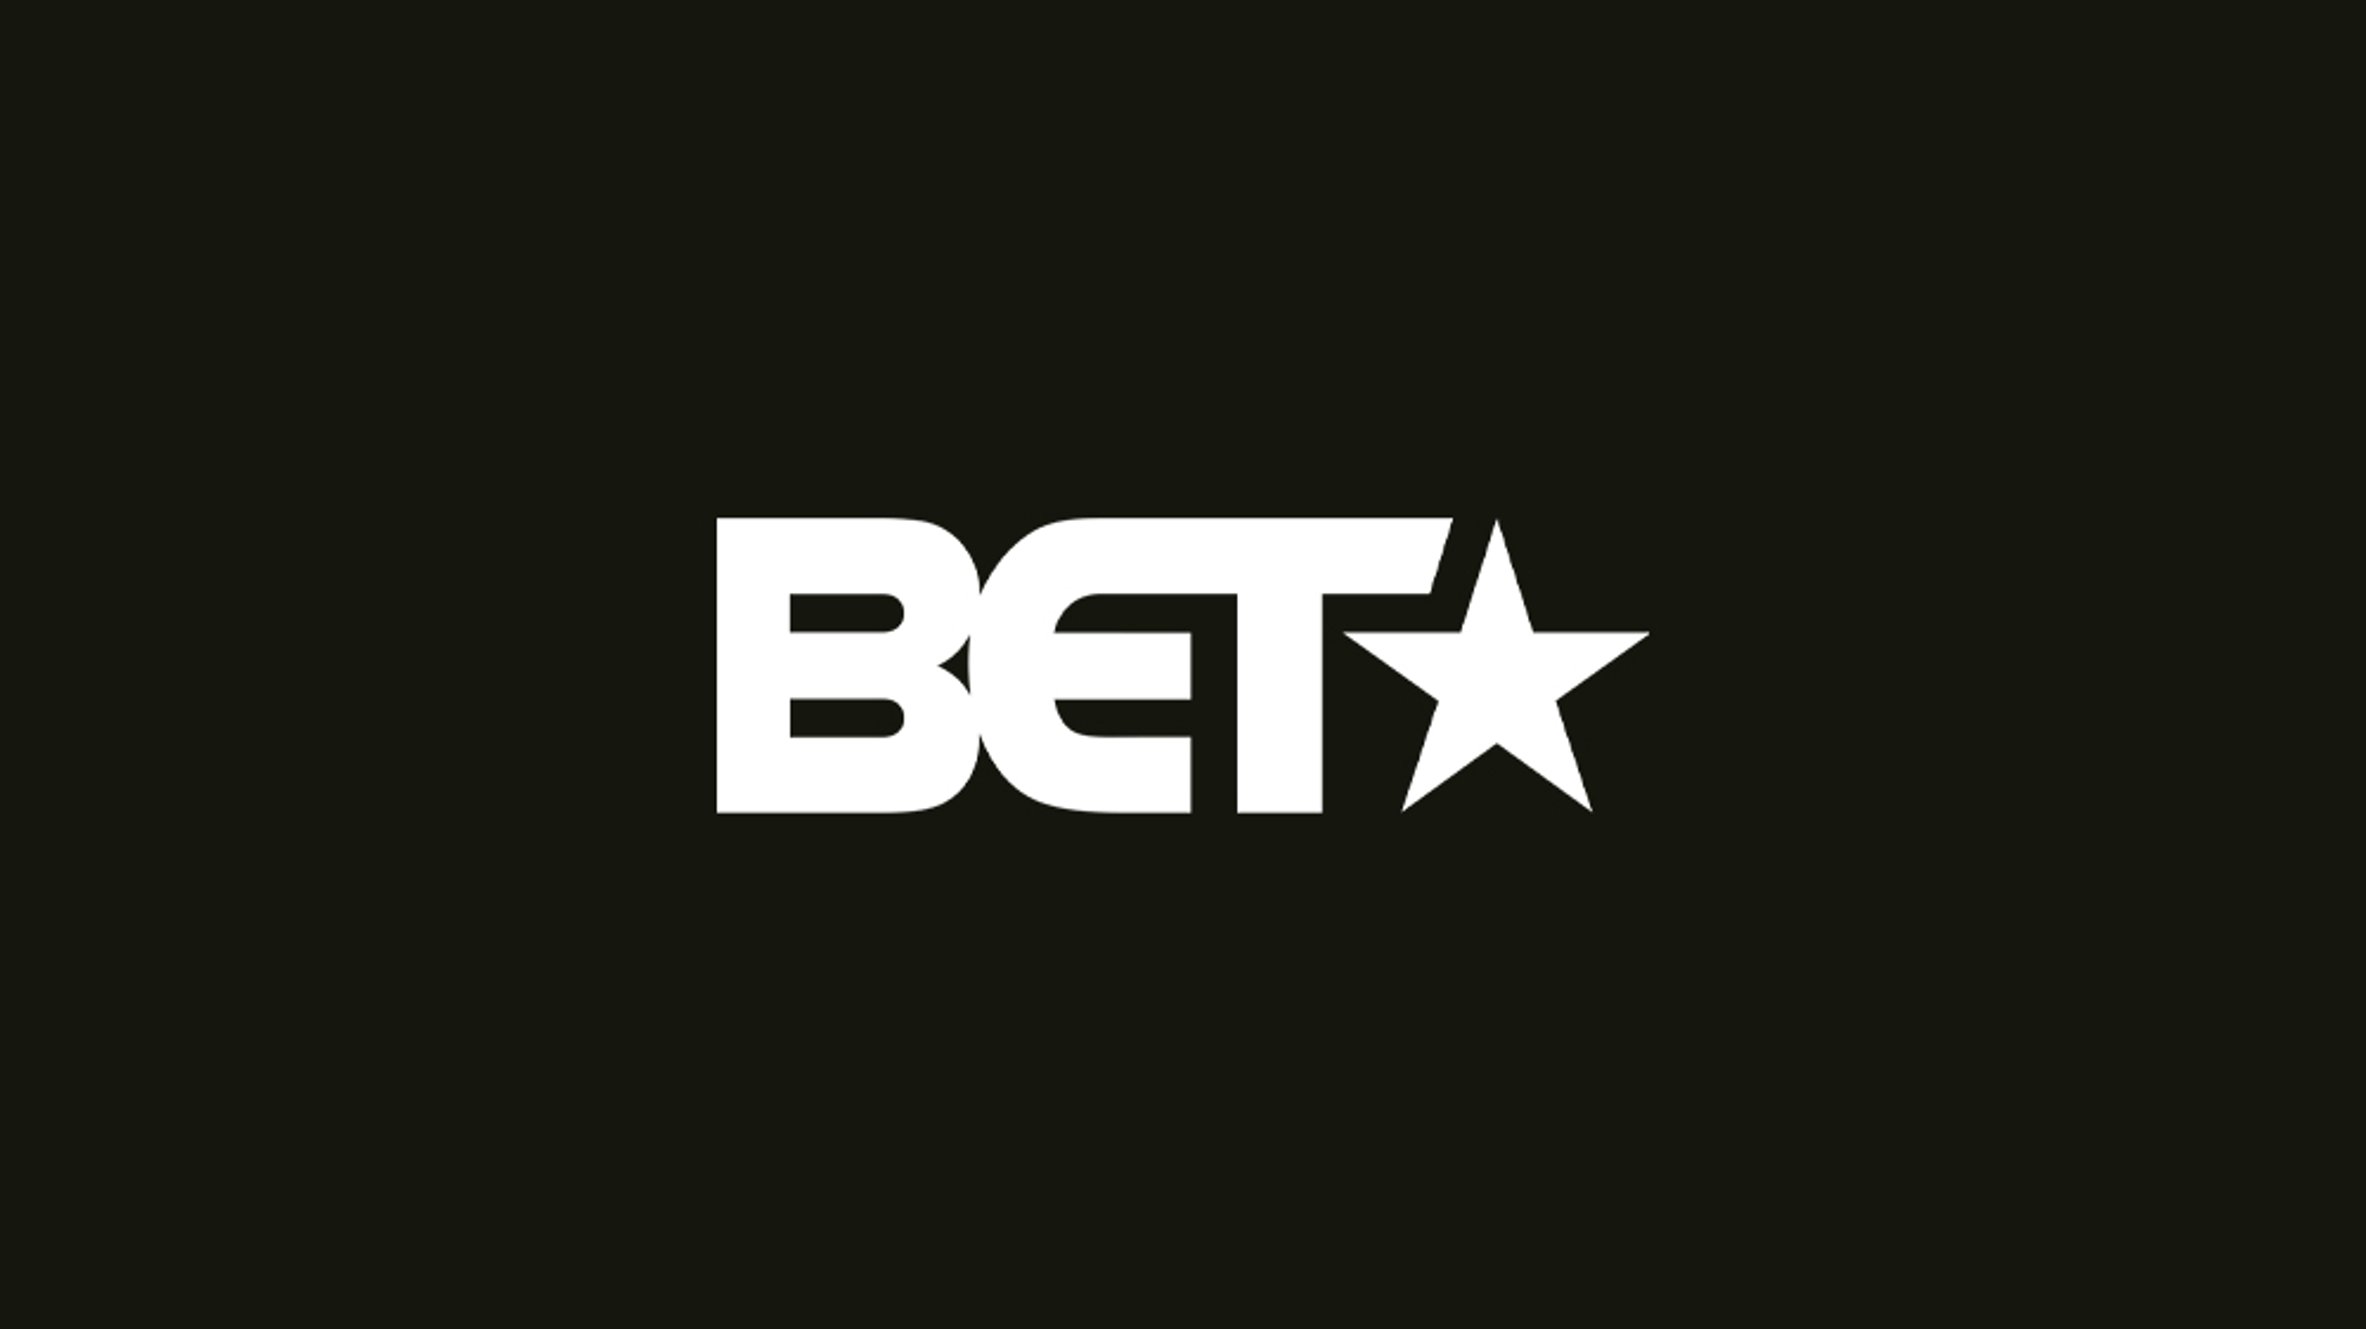 Casting extras to work on the BET+ TV Series The Ms. Pat Show Season 2